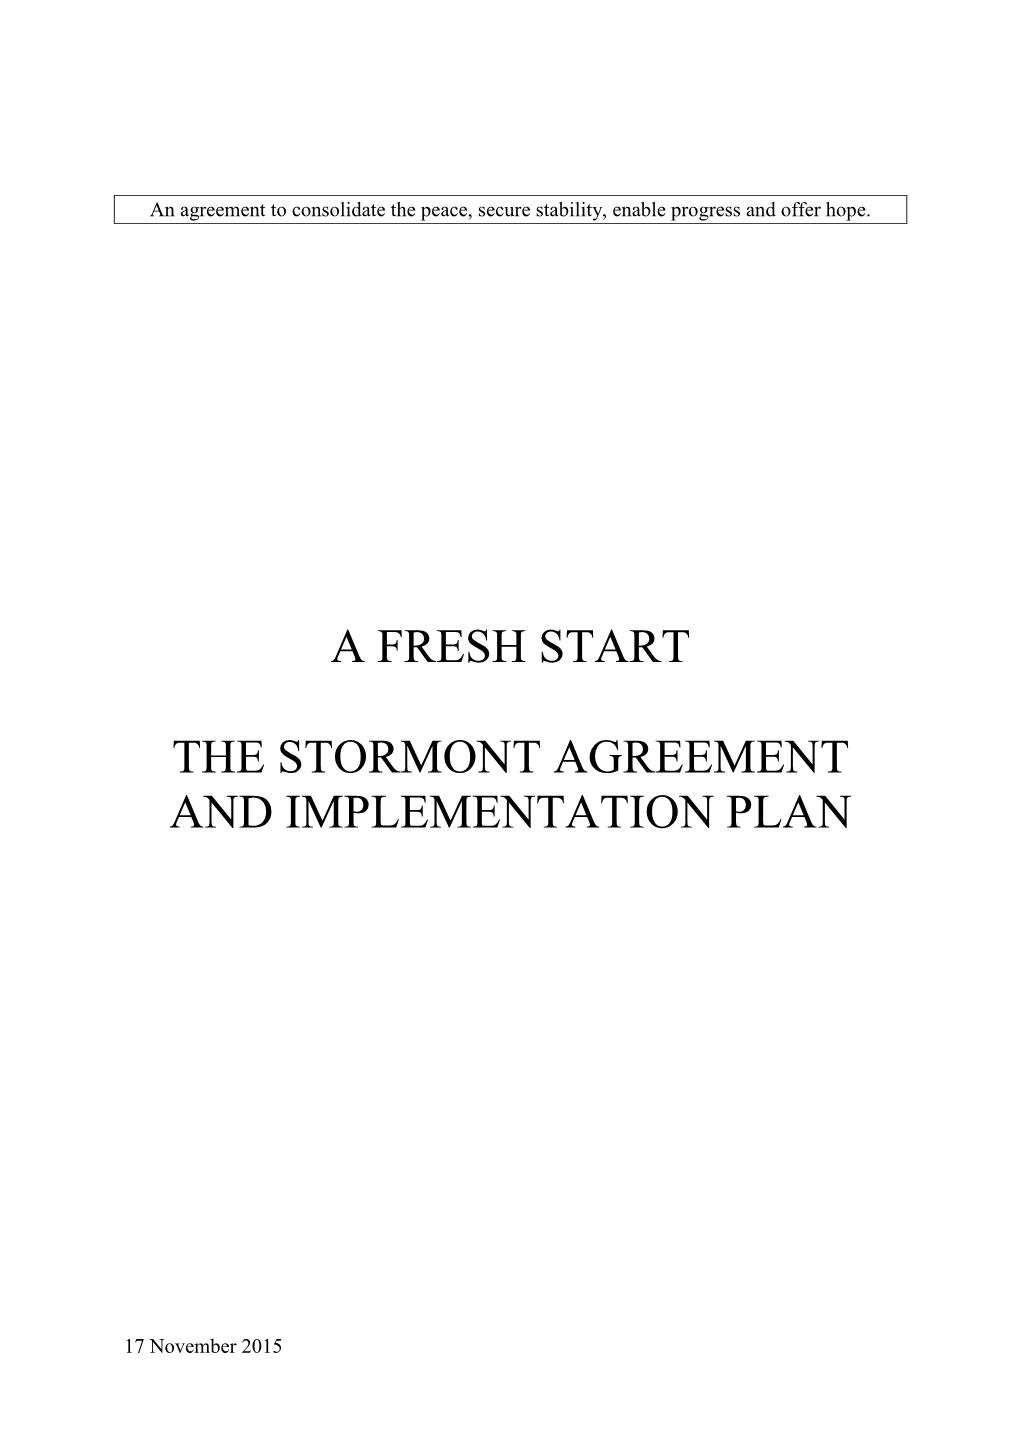 A Fresh Start – the Stormont Agreement